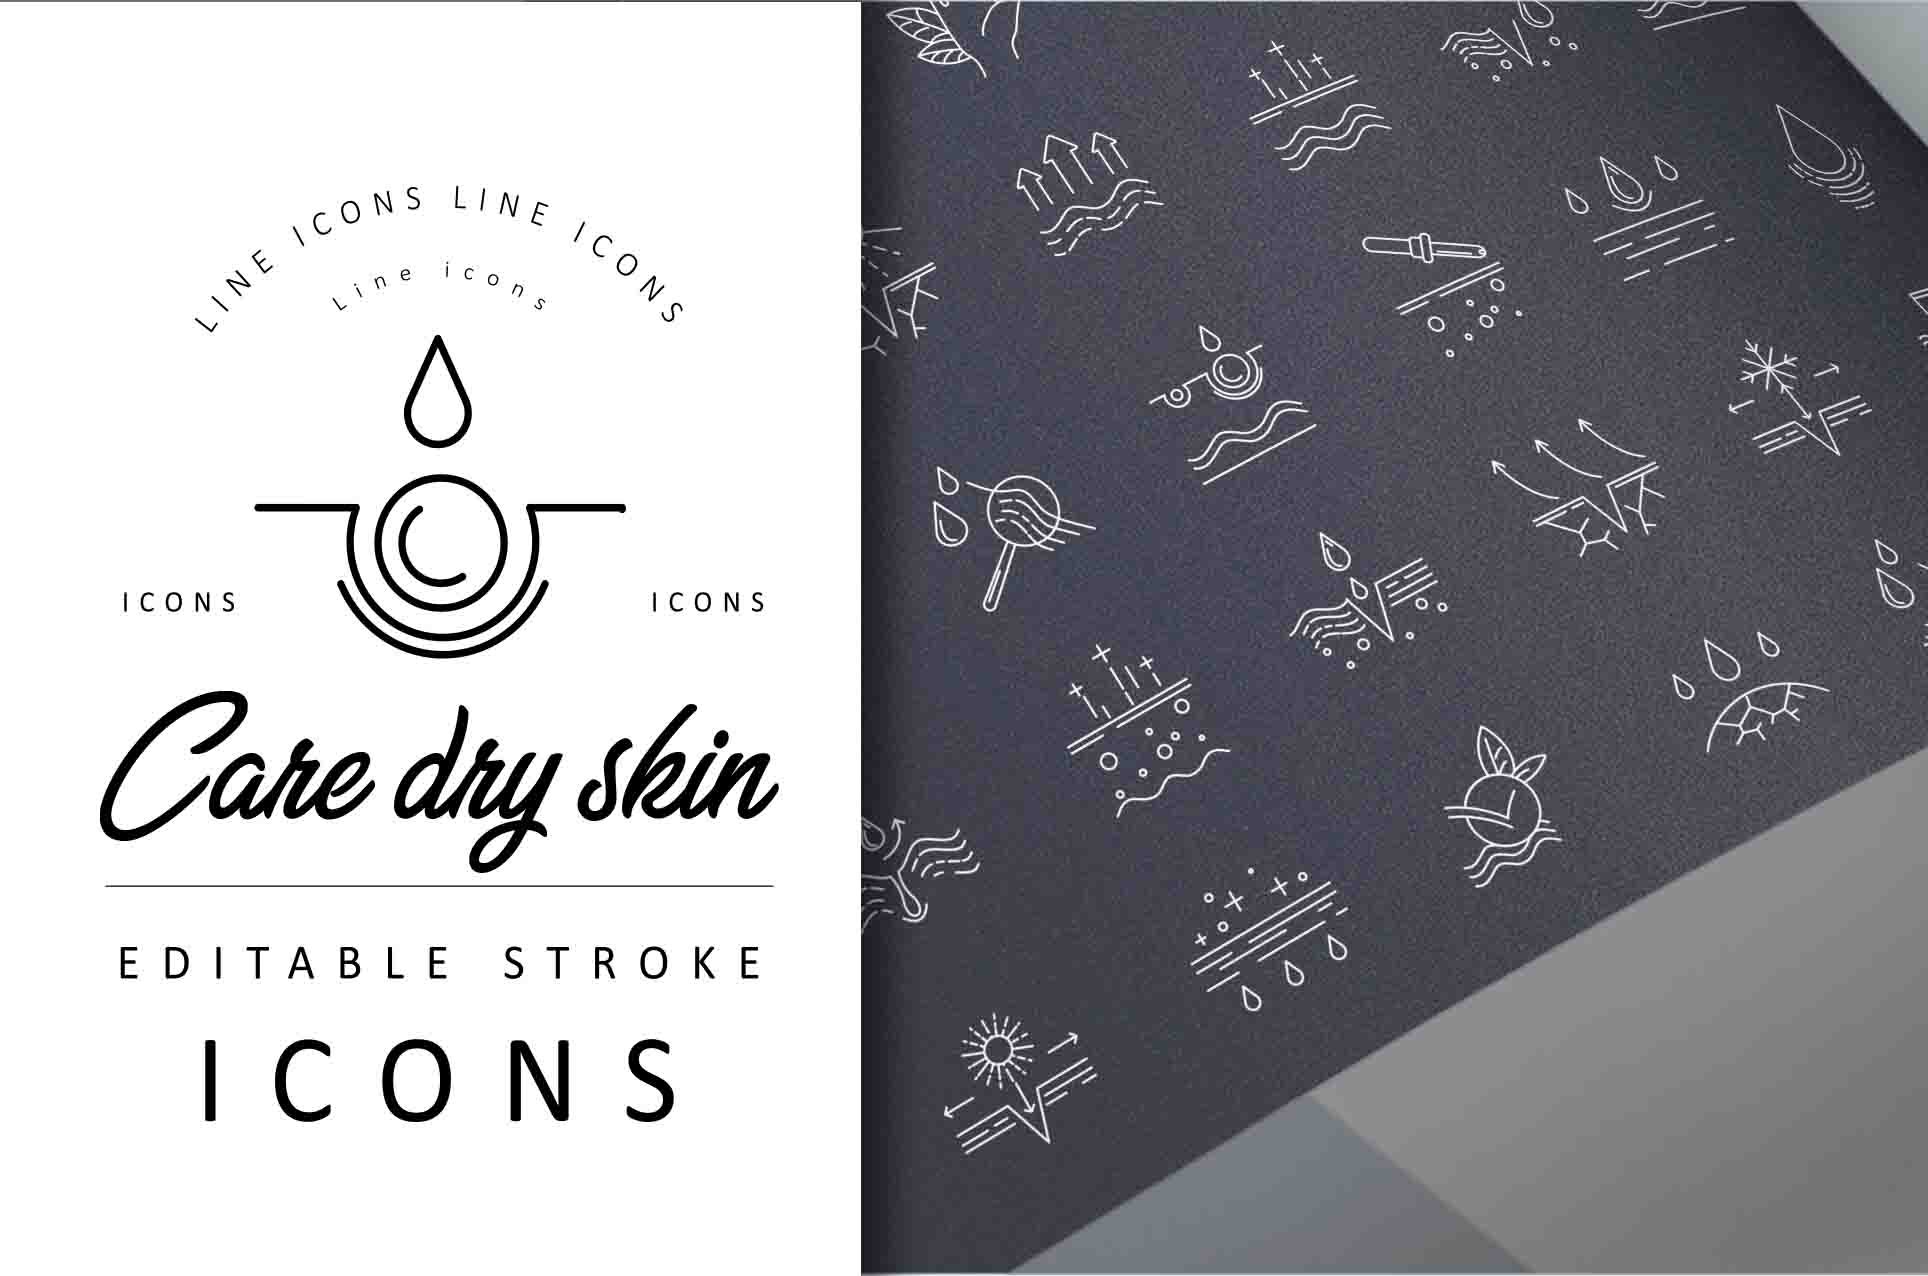 Care dry skin icons collection cover image.